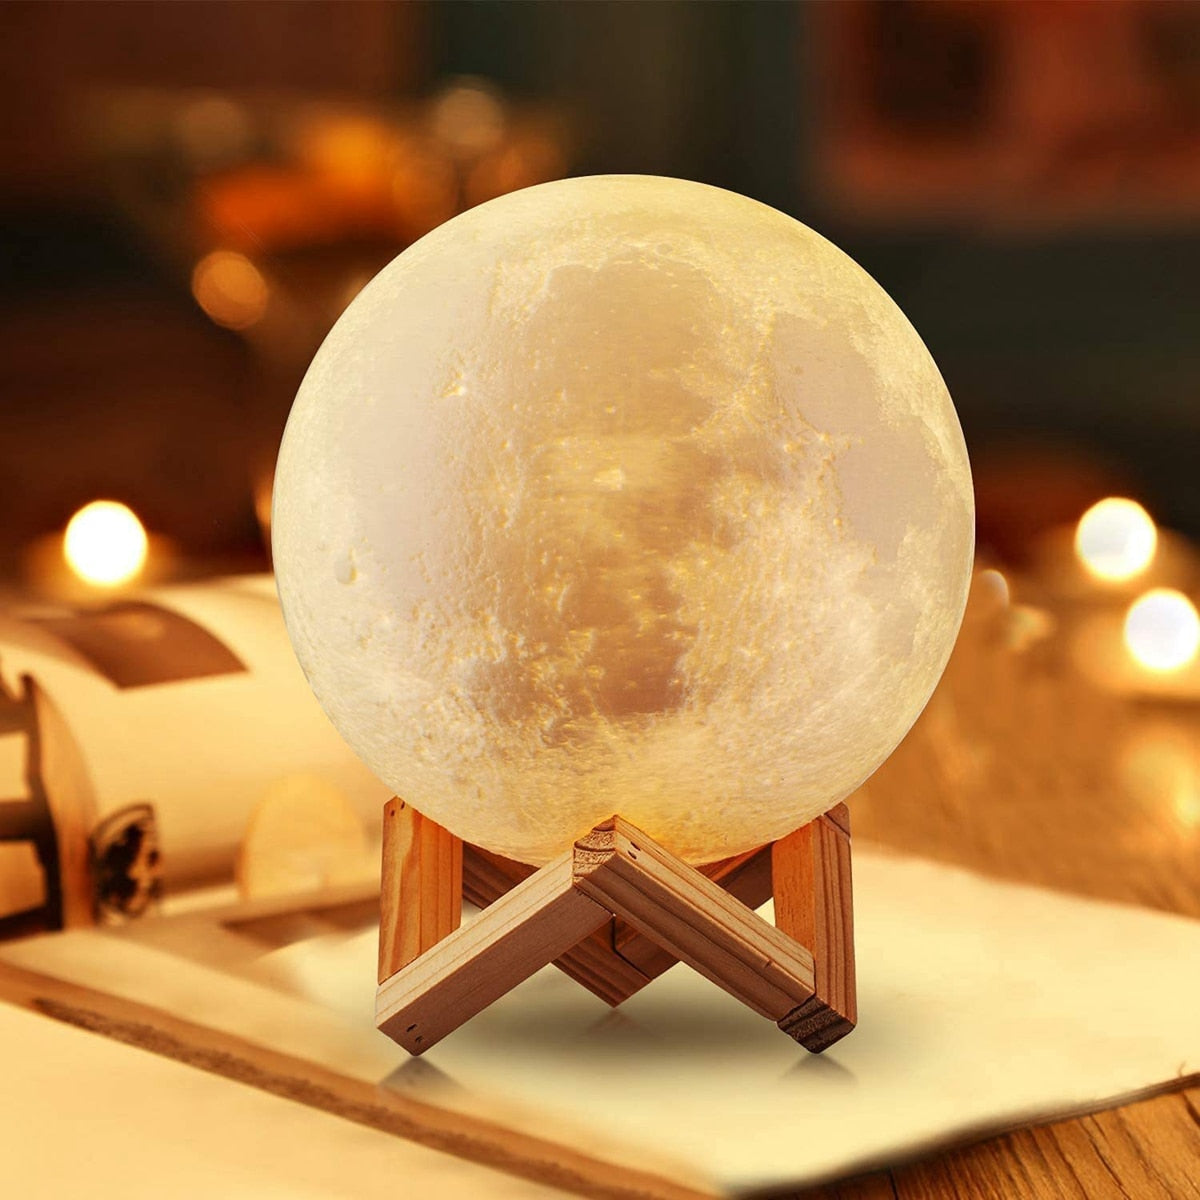 Aesthetic Moon LED Lamp (Various Light Colors)